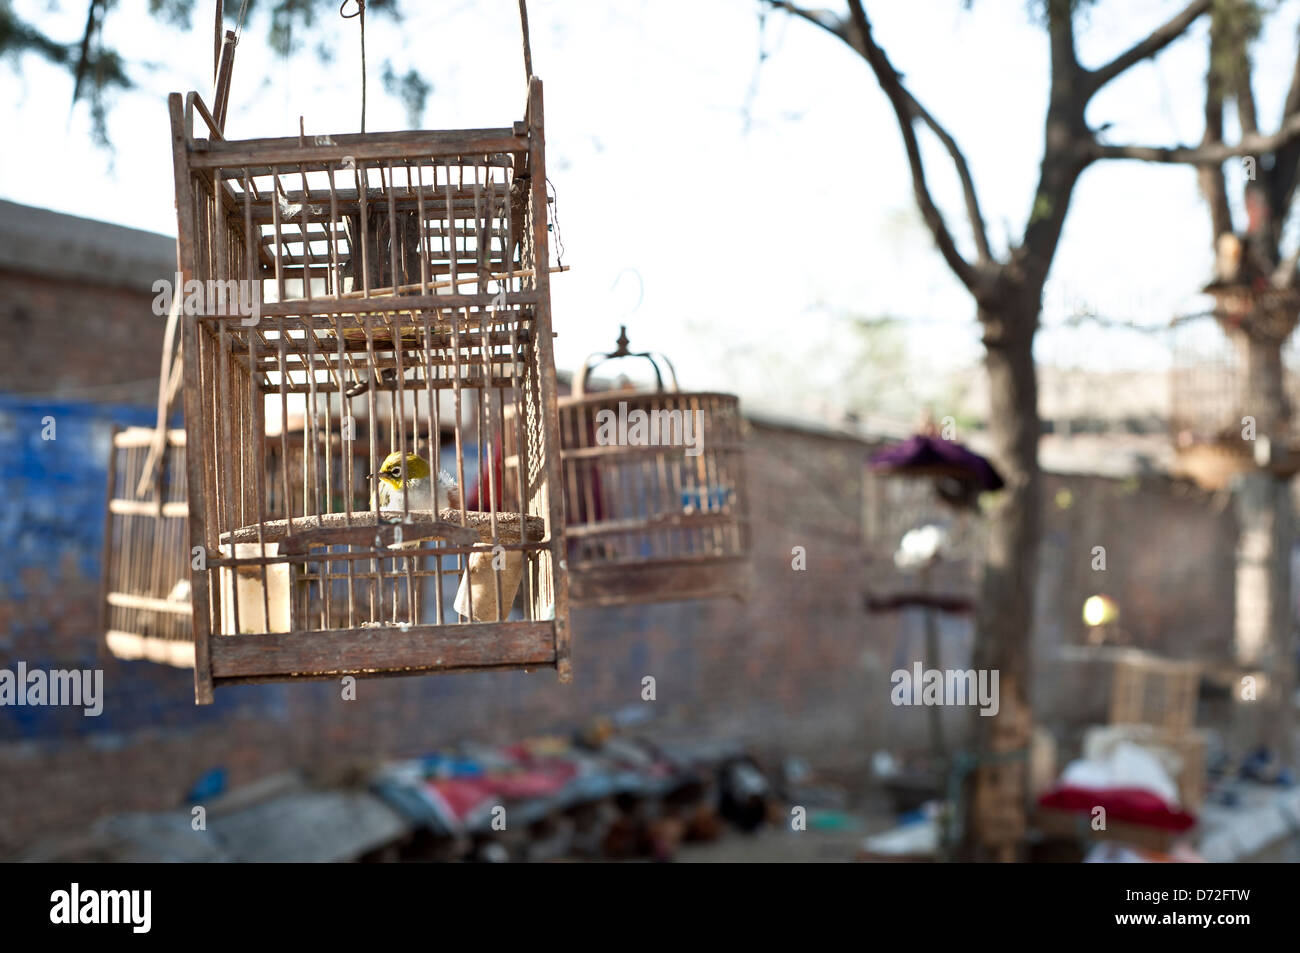 Birdcages hanging from a tree in the city of Kaifeng, Henan Province, China Stock Photo